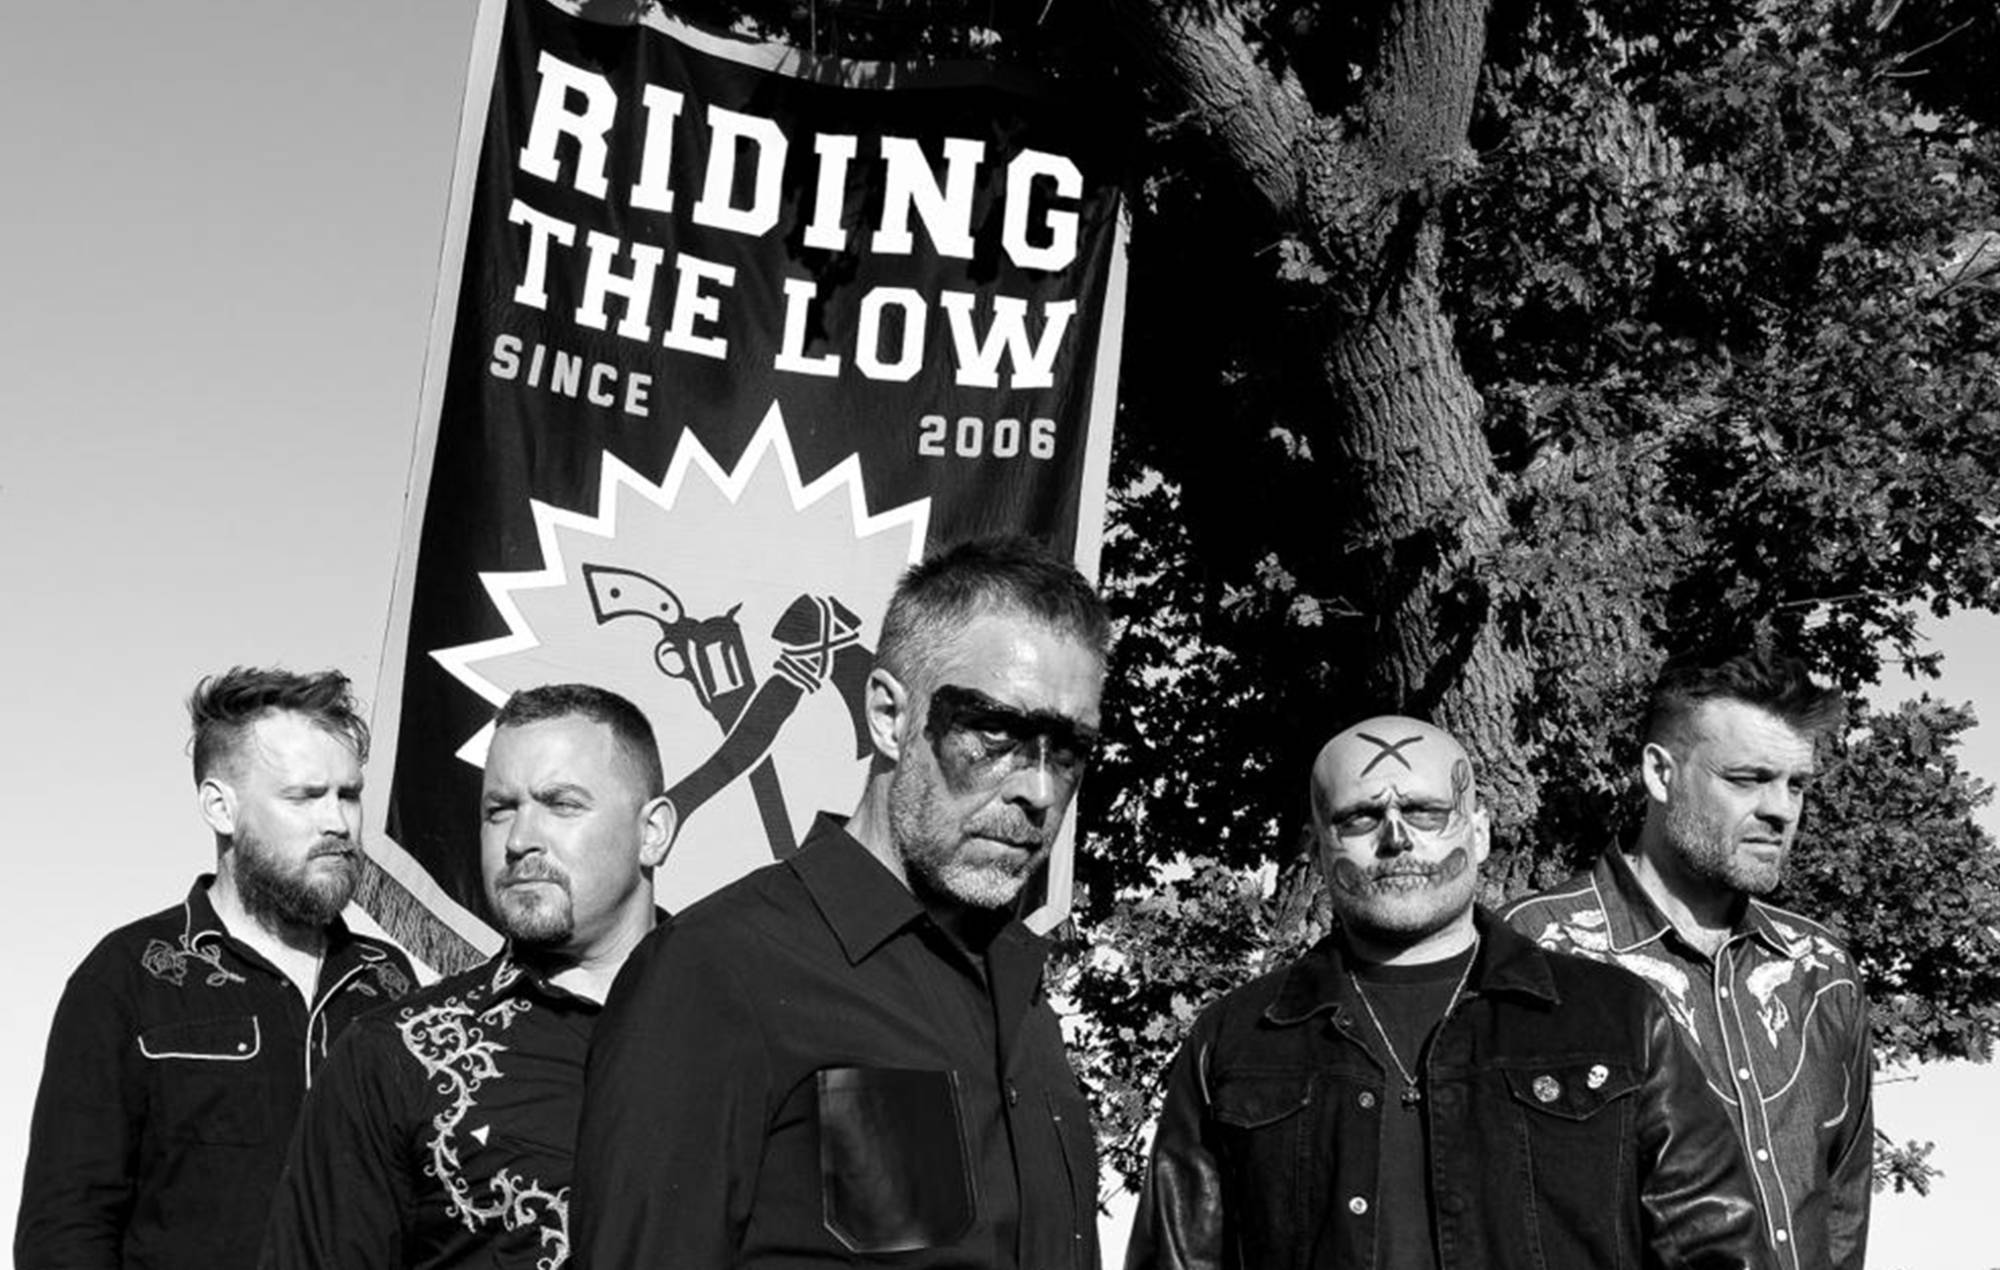 Paddy Considine’s band Riding The Low return: “It’s always been music above everything else for me”